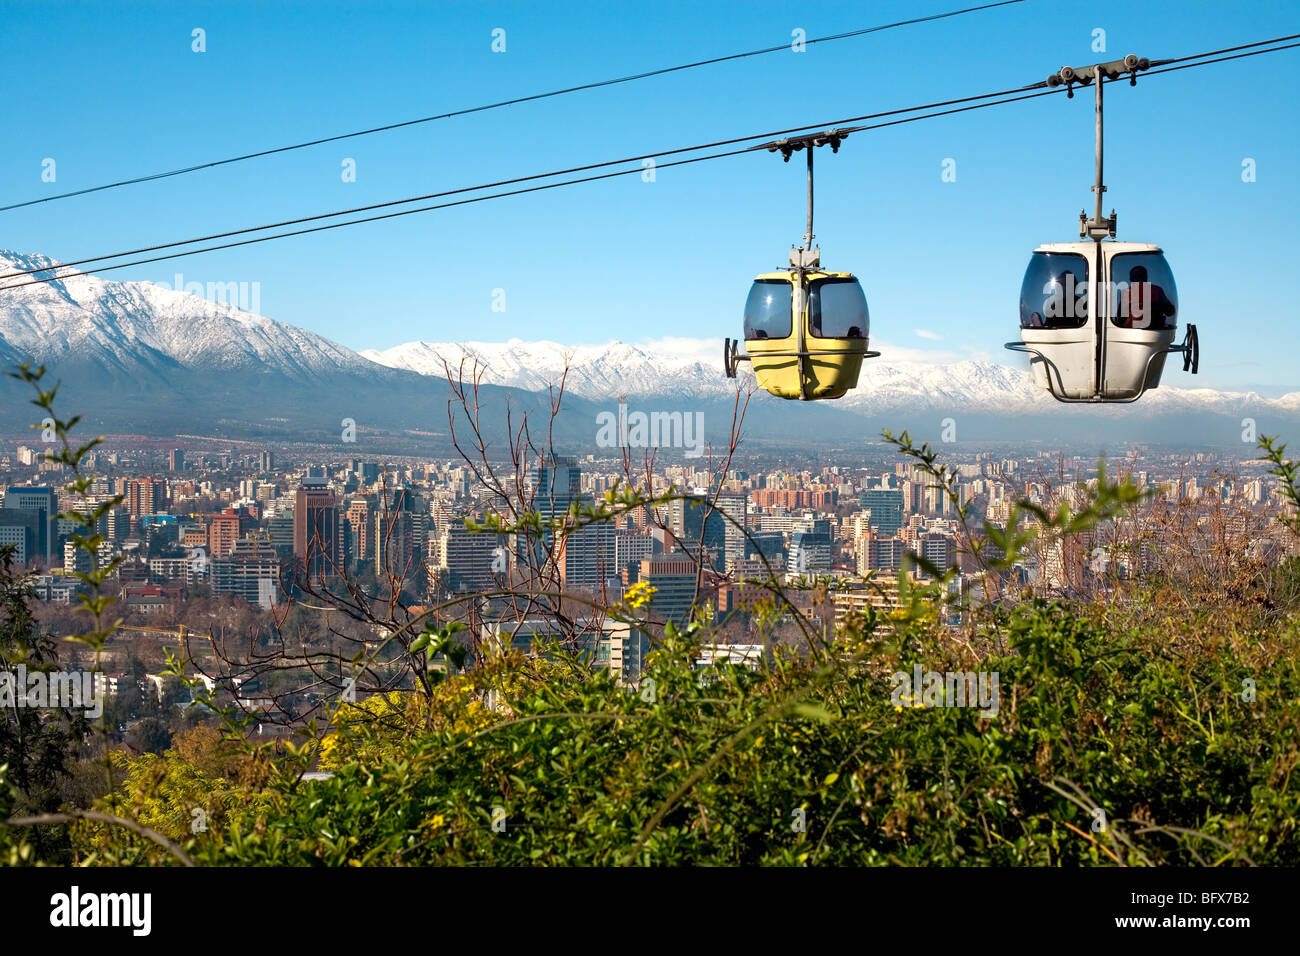 Cable car in San Cristobal hill, overlooking a panoramic view of Santiago de Chile Stock Photo